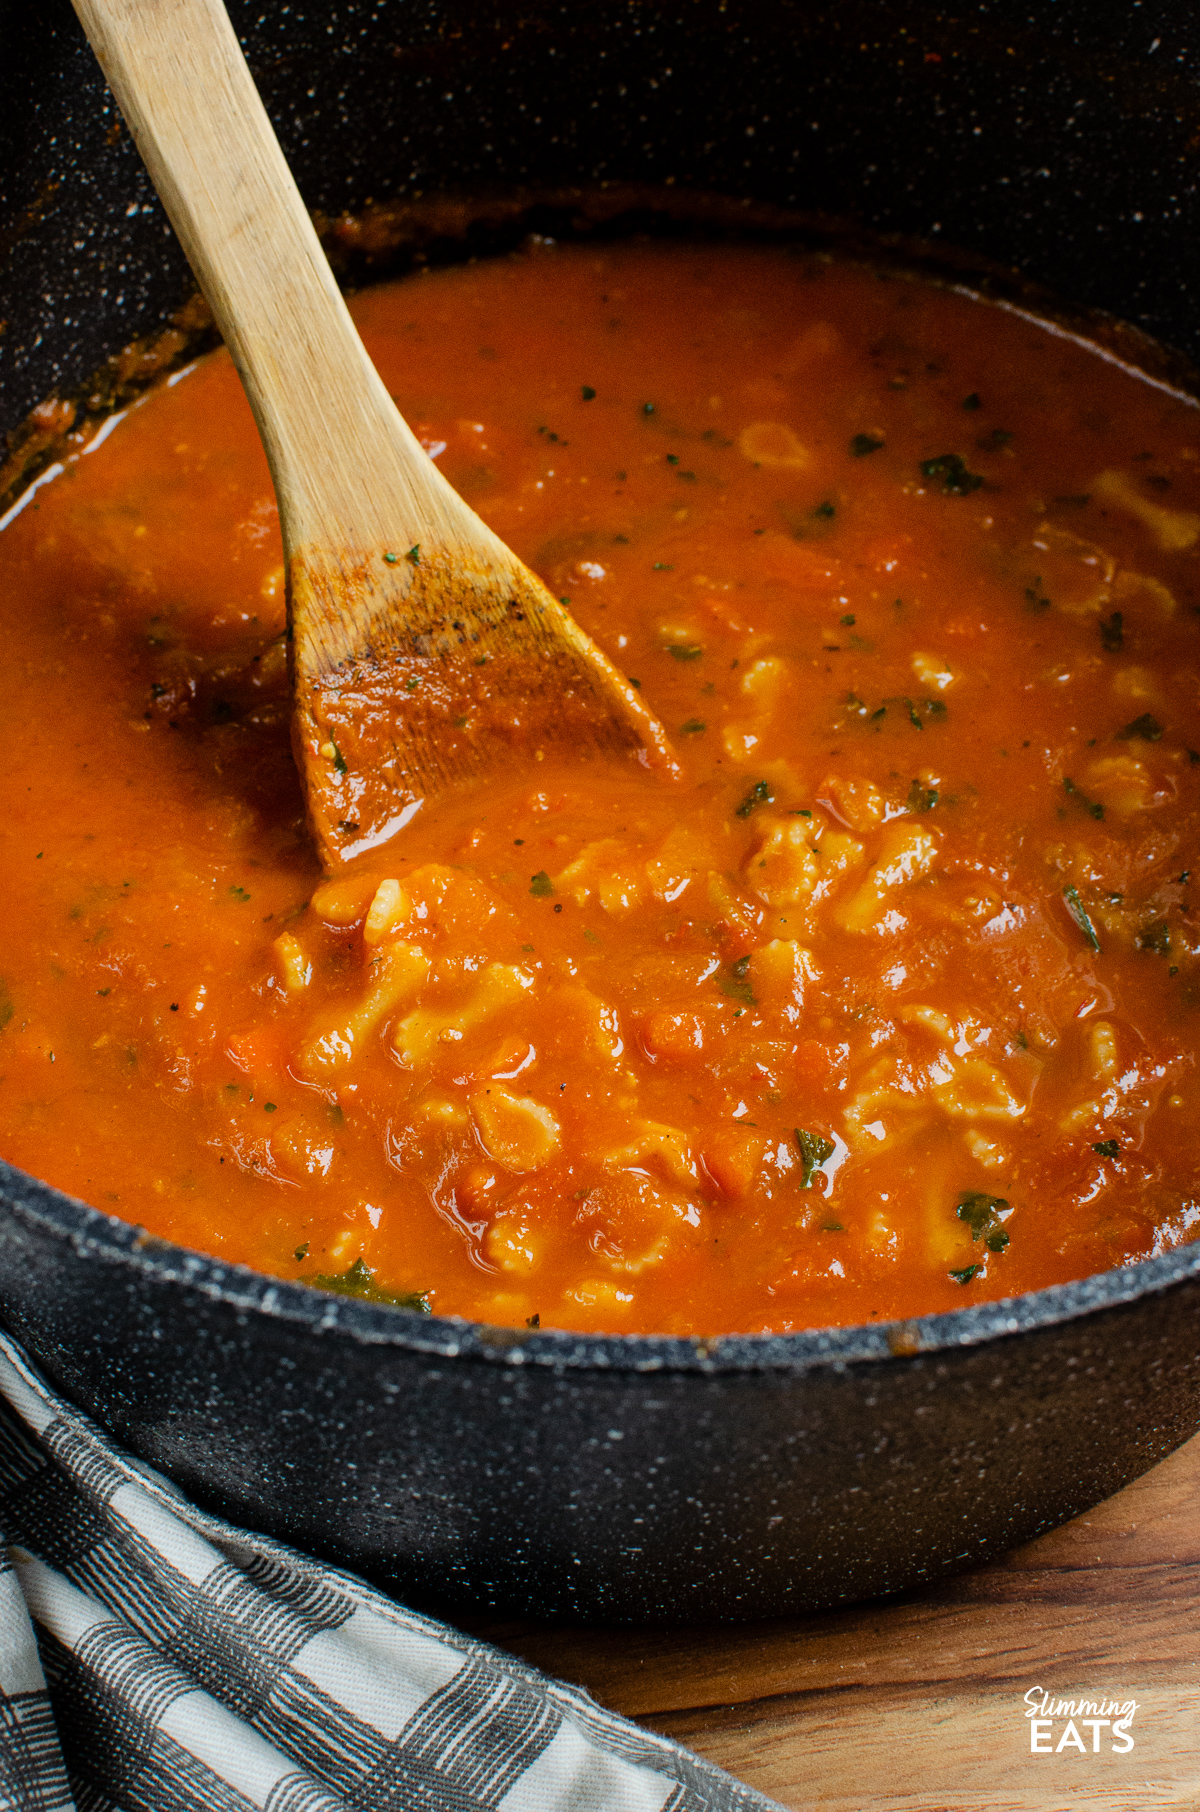 A rich and vibrant tomato and pasta soup simmering in a large black ceramic non-stick saucepan, with a wooden spoon resting inside, ready for stirring.